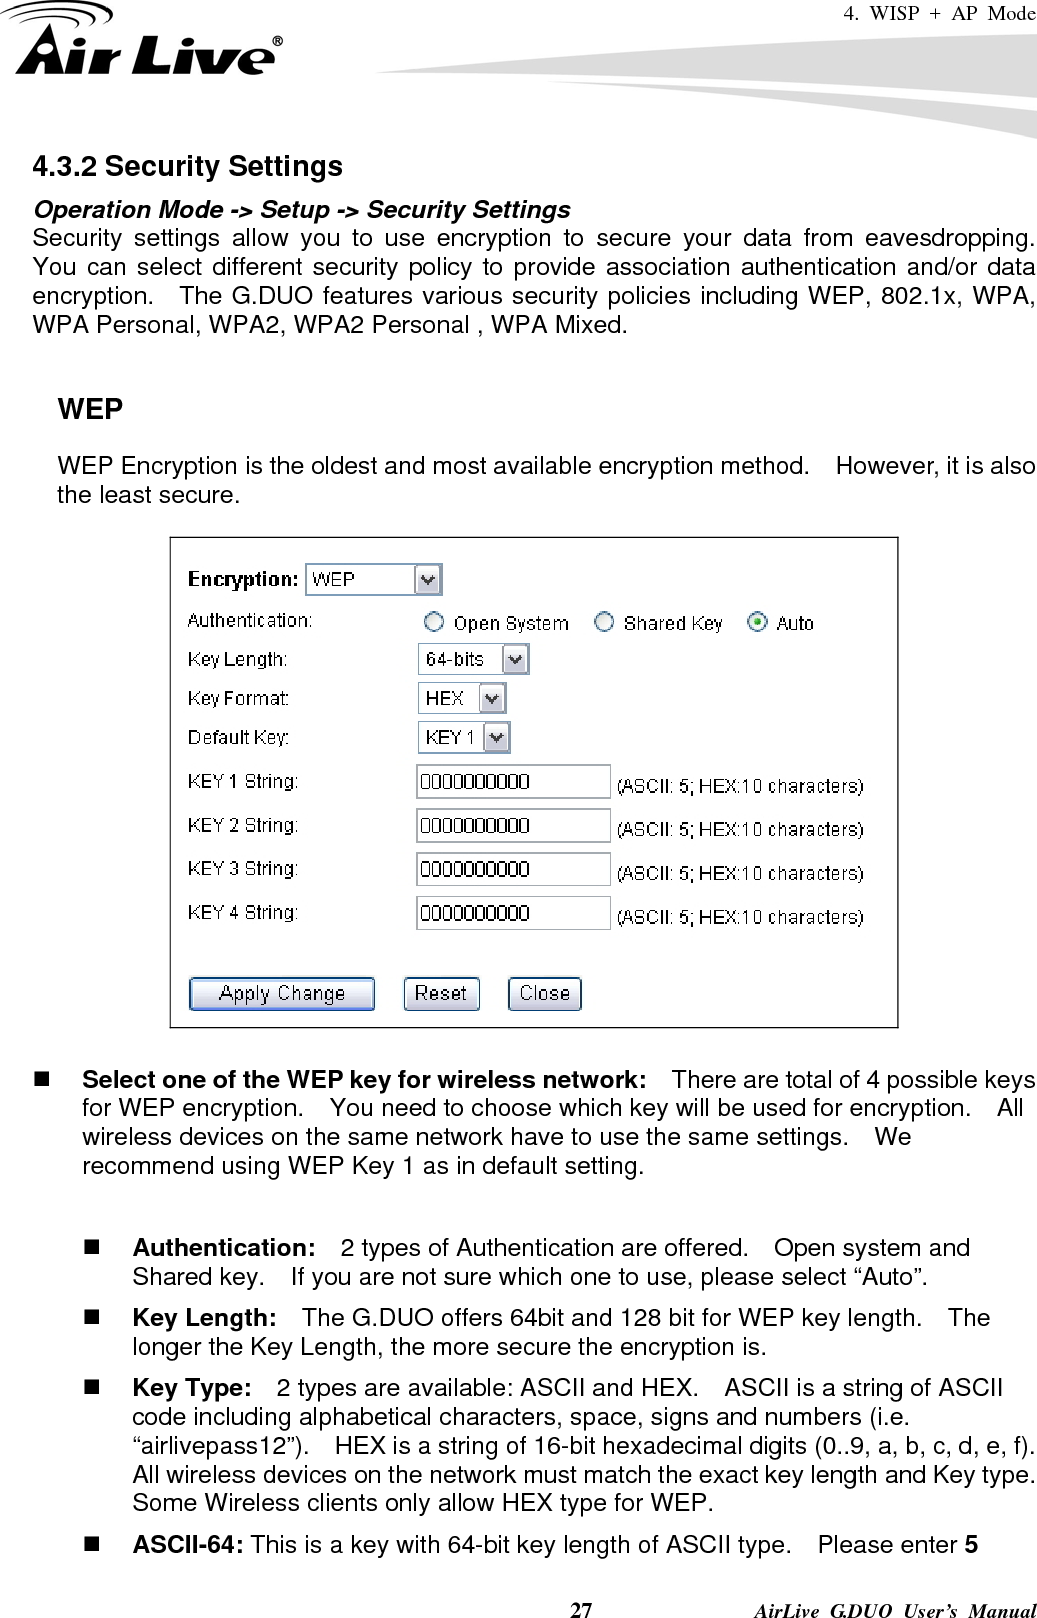 4. WISP + AP Mode    27              AirLive G.DUO User’s Manual 4.3.2 Security Settings Operation Mode -&gt; Setup -&gt; Security Settings Security settings allow you to use encryption to secure your data from eavesdropping.  You can select different security policy to provide association authentication and/or data encryption.    The G.DUO features various security policies including WEP, 802.1x, WPA, WPA Personal, WPA2, WPA2 Personal , WPA Mixed.      WEP WEP Encryption is the oldest and most available encryption method.    However, it is also the least secure.       Select one of the WEP key for wireless network:    There are total of 4 possible keys for WEP encryption.    You need to choose which key will be used for encryption.  All wireless devices on the same network have to use the same settings.    We recommend using WEP Key 1 as in default setting.   Authentication:  2 types of Authentication are offered.    Open system and Shared key.    If you are not sure which one to use, please select “Auto”.  Key Length:    The G.DUO offers 64bit and 128 bit for WEP key length.    The longer the Key Length, the more secure the encryption is.  Key Type:    2 types are available: ASCII and HEX.    ASCII is a string of ASCII code including alphabetical characters, space, signs and numbers (i.e. “airlivepass12”).    HEX is a string of 16-bit hexadecimal digits (0..9, a, b, c, d, e, f).   All wireless devices on the network must match the exact key length and Key type.   Some Wireless clients only allow HEX type for WEP.  ASCII-64: This is a key with 64-bit key length of ASCII type.    Please enter 5 